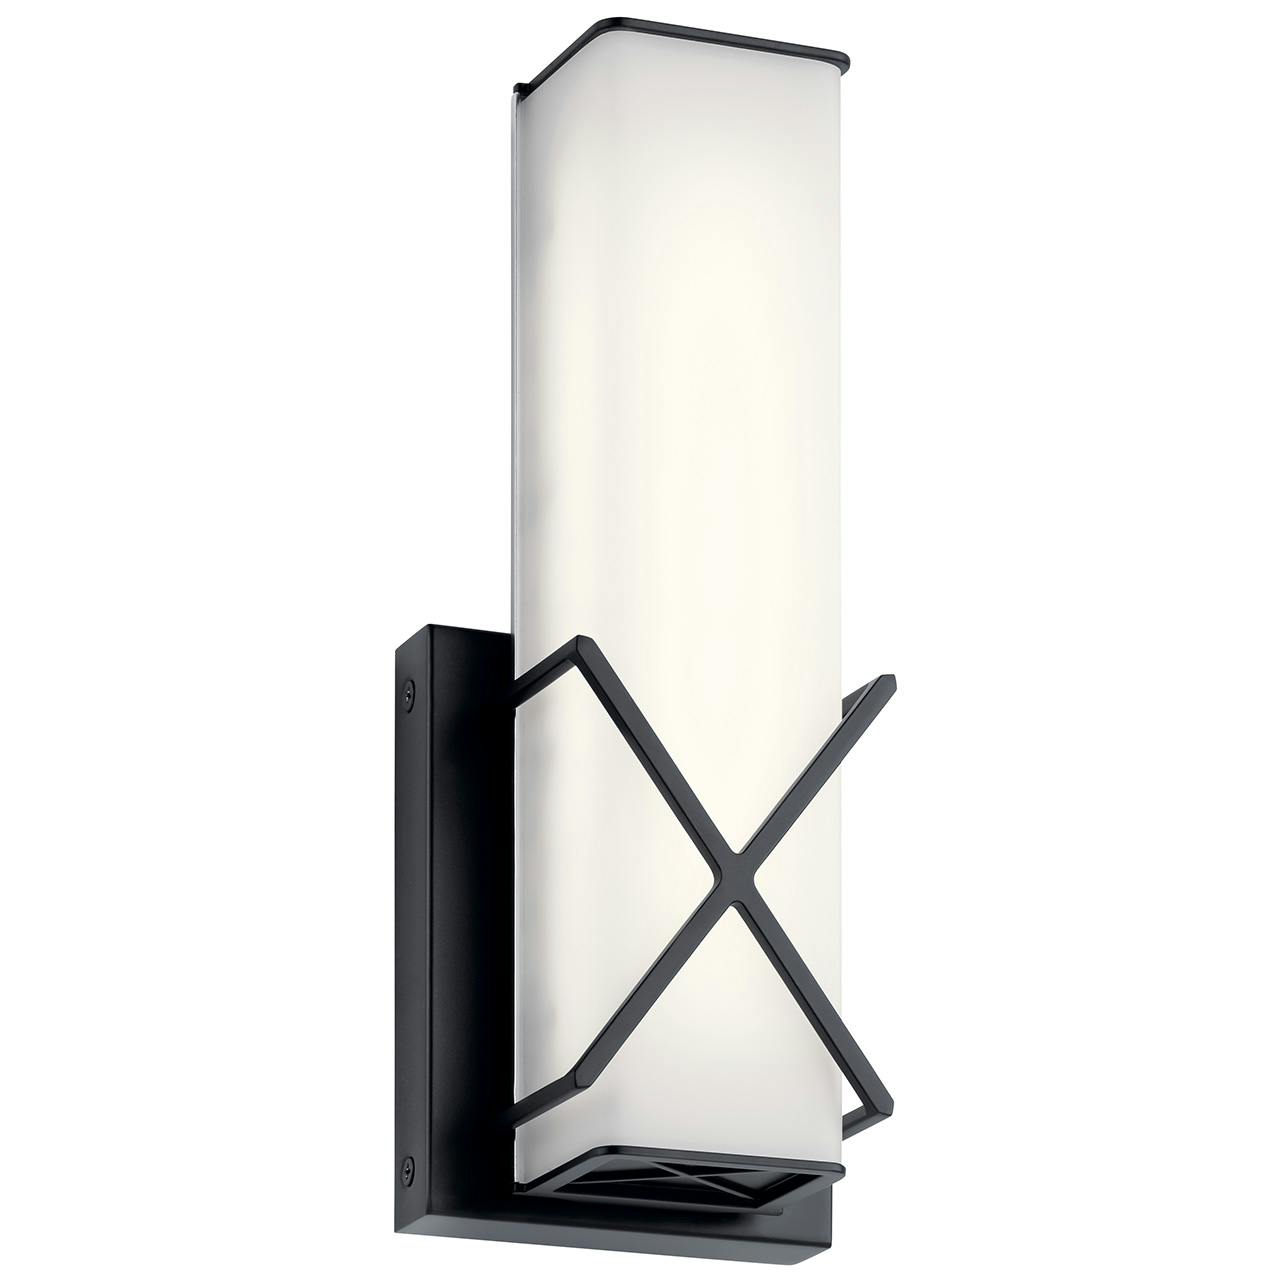 Trinsic™ LED Wall Sconce Matte Black on a white background